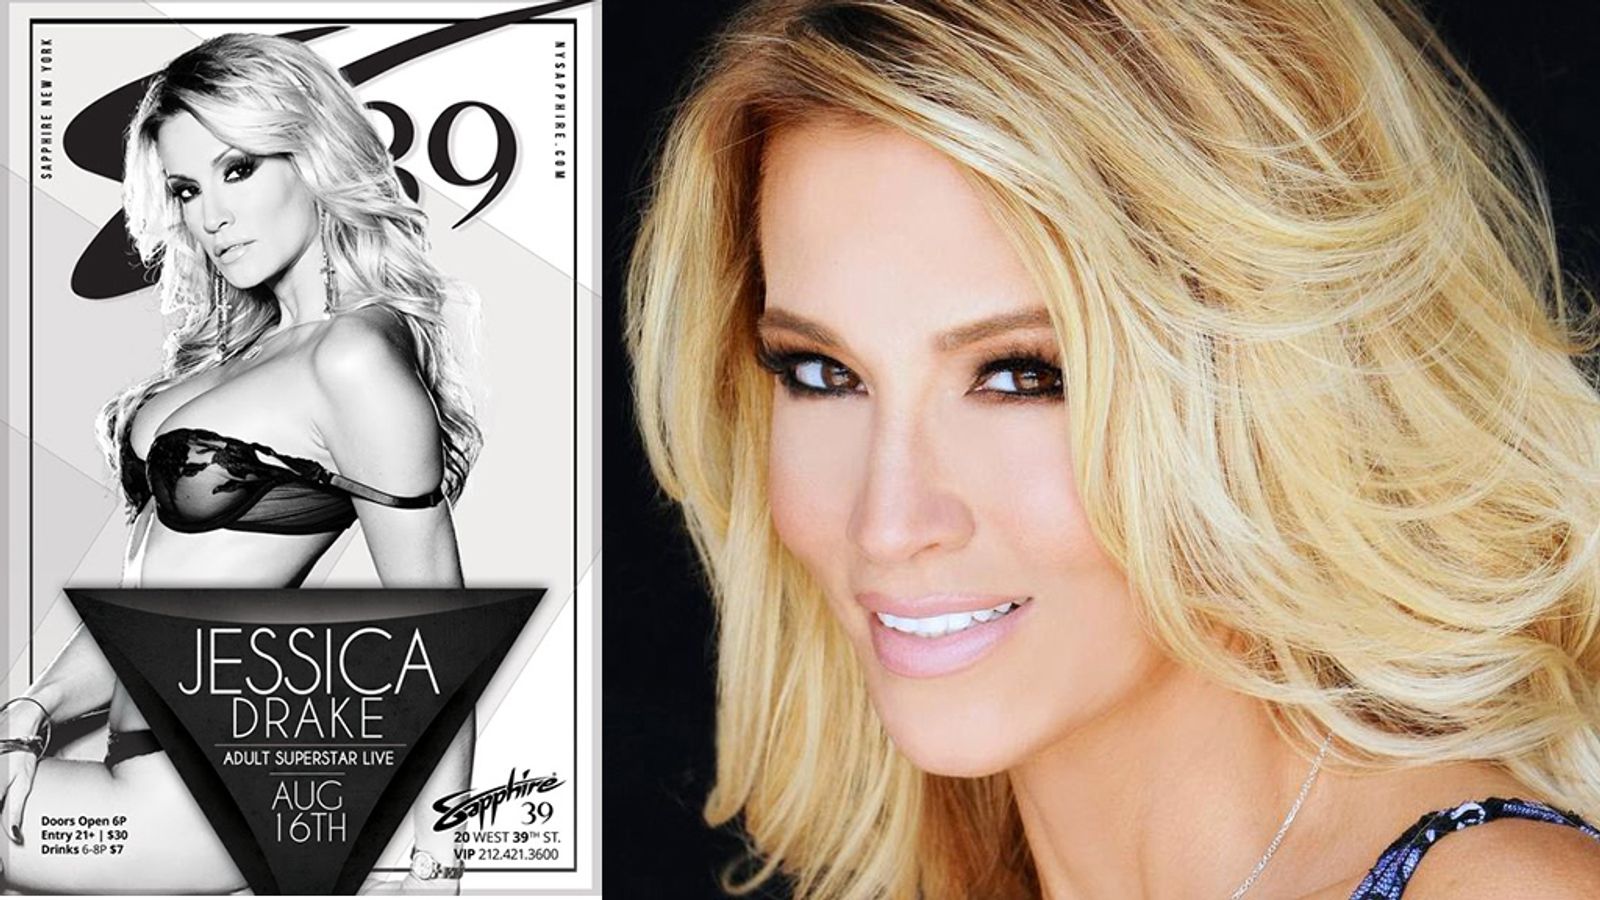 Jessica Drake to Feature Dance at Sapphire 39 Tonight